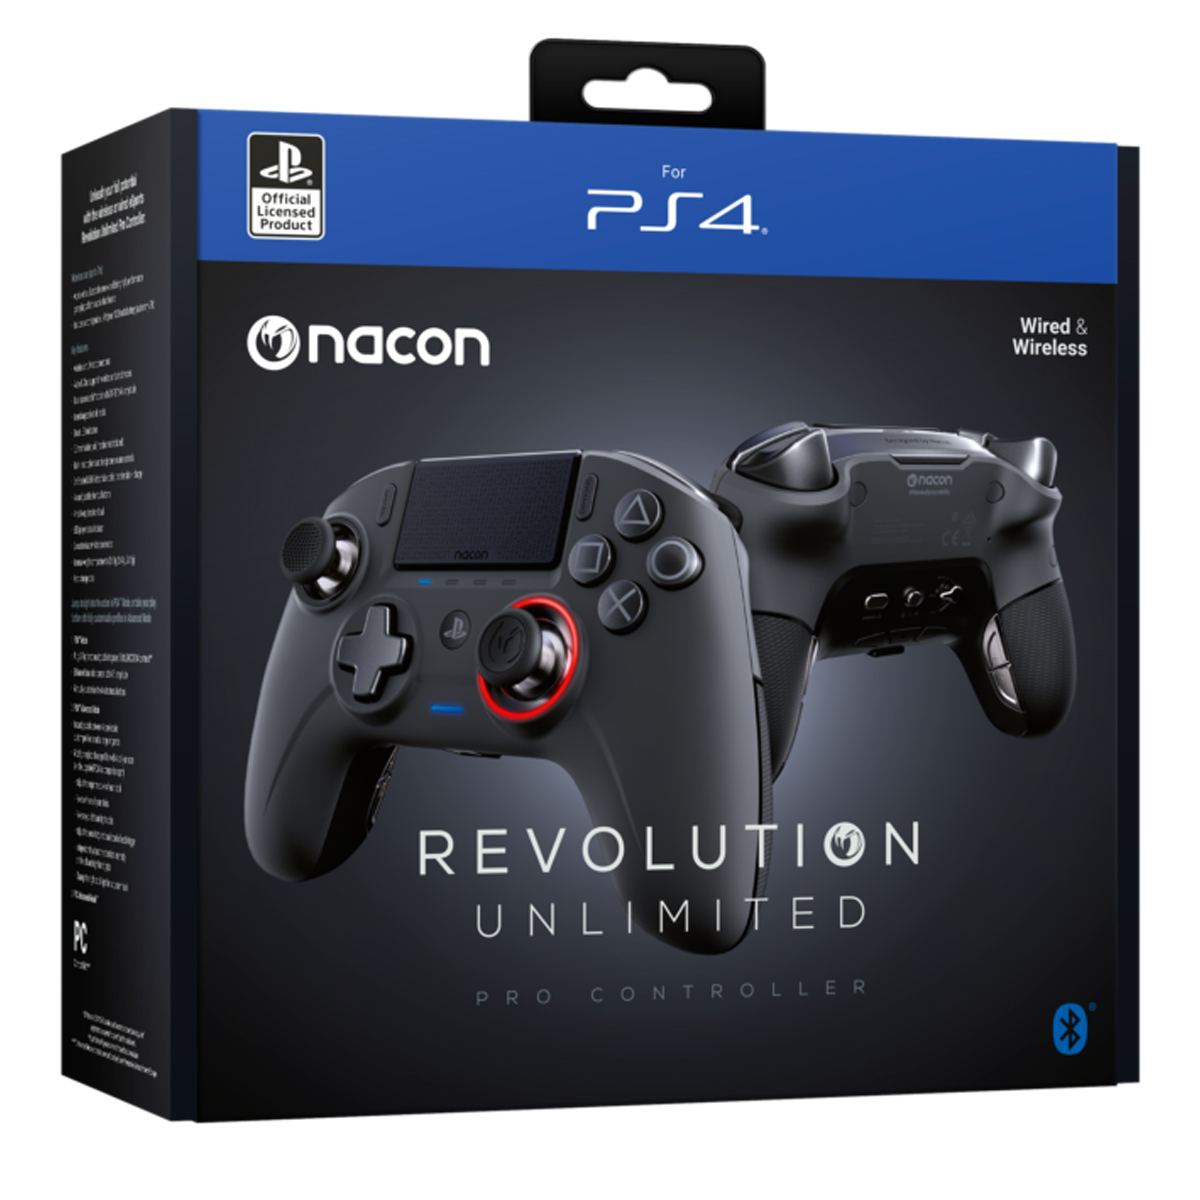 Nacon Revolution Unlimited Pro Controller for Playstation 4 for 